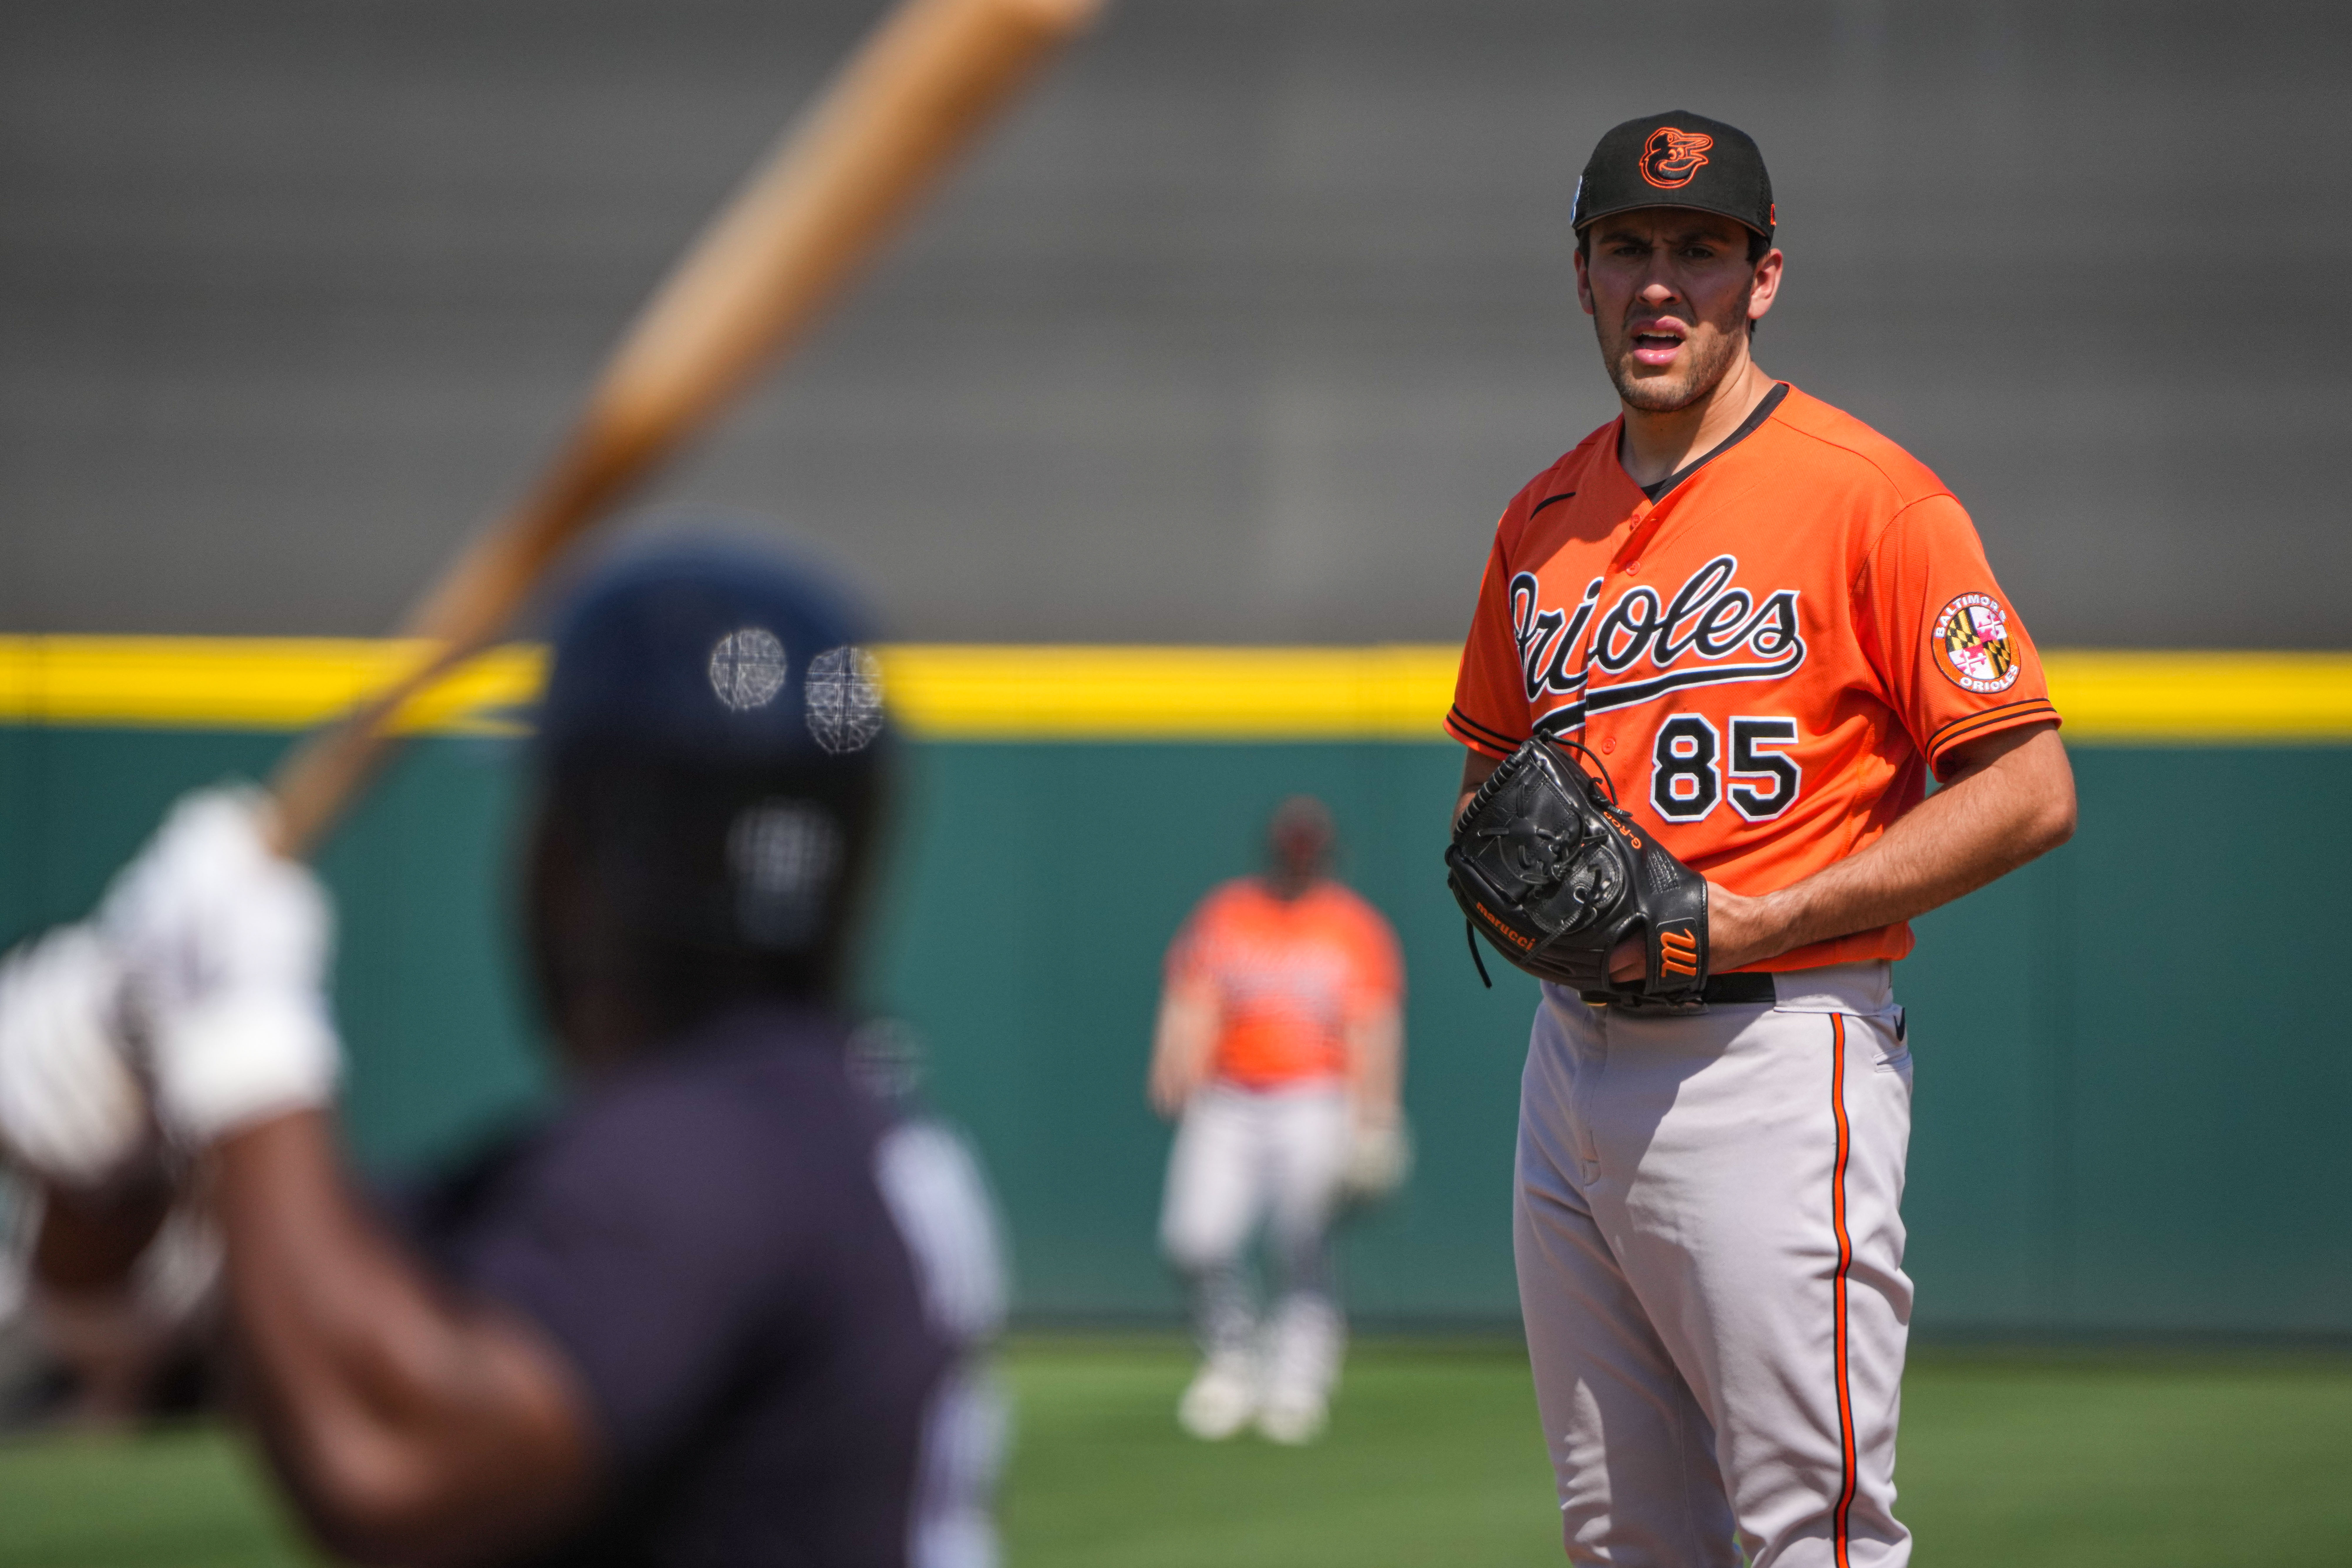 Reasons to care about Baltimore Orioles spring training in 2019